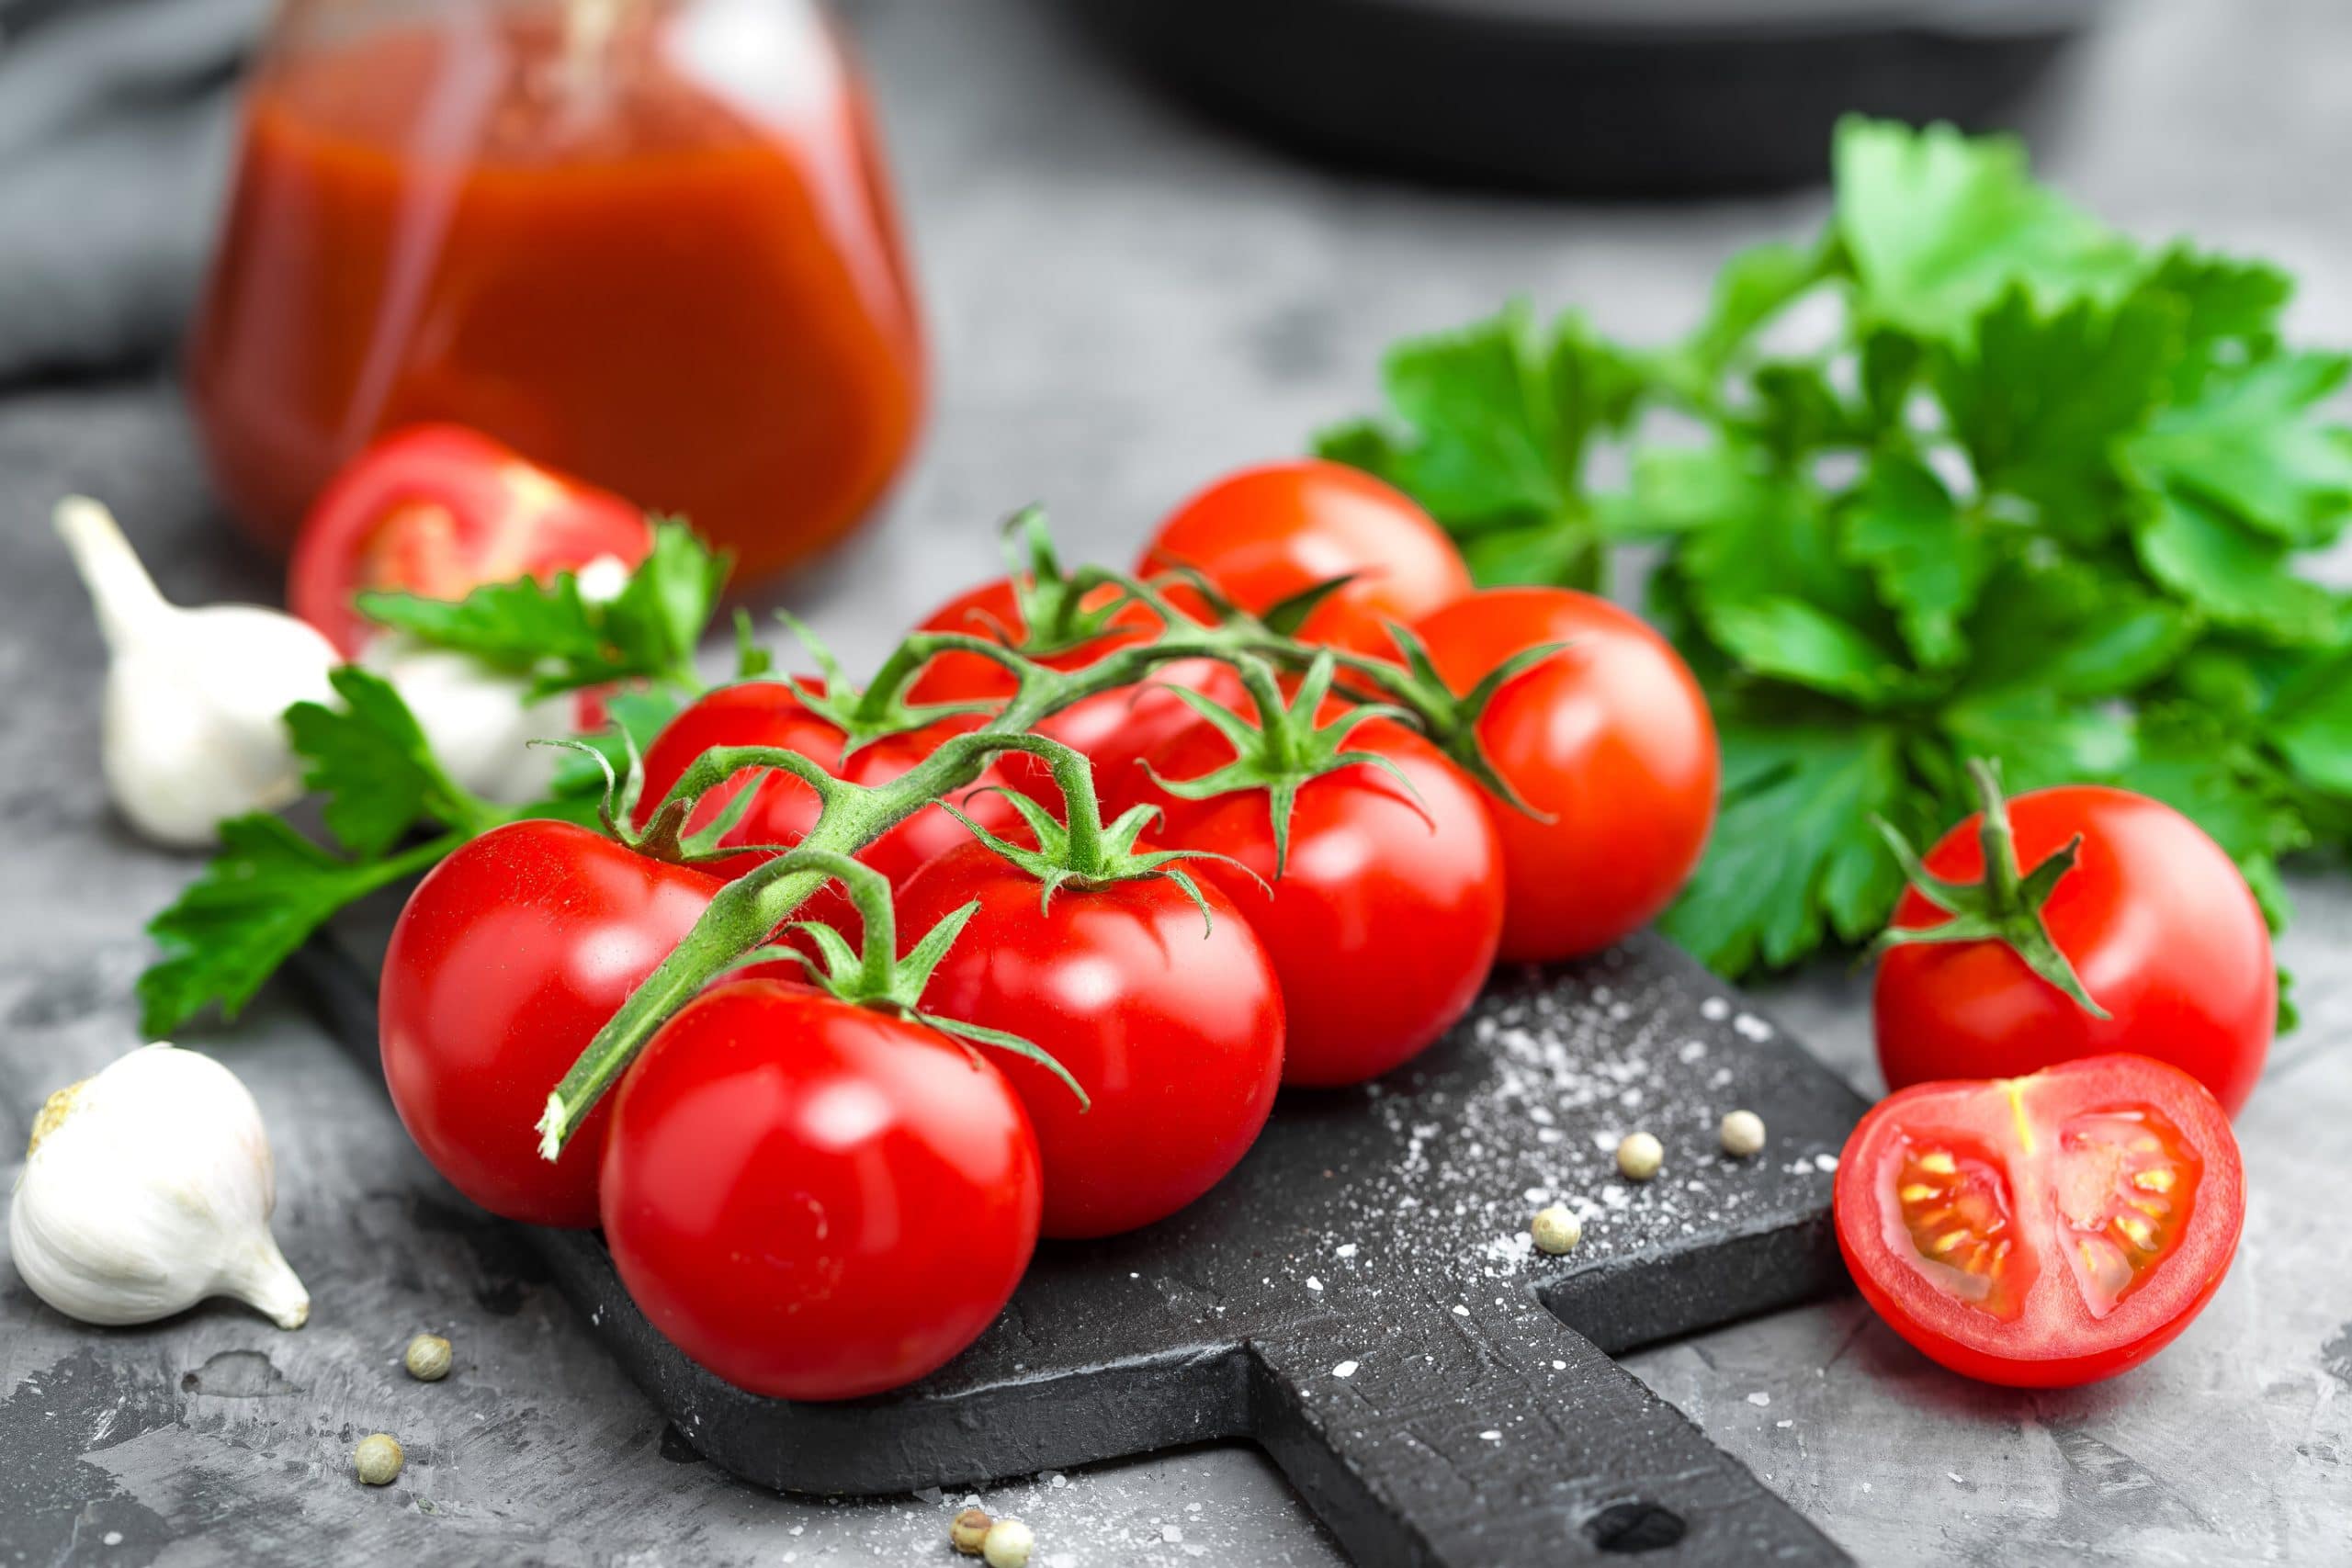 Are Tomatoes Low FODMAP?